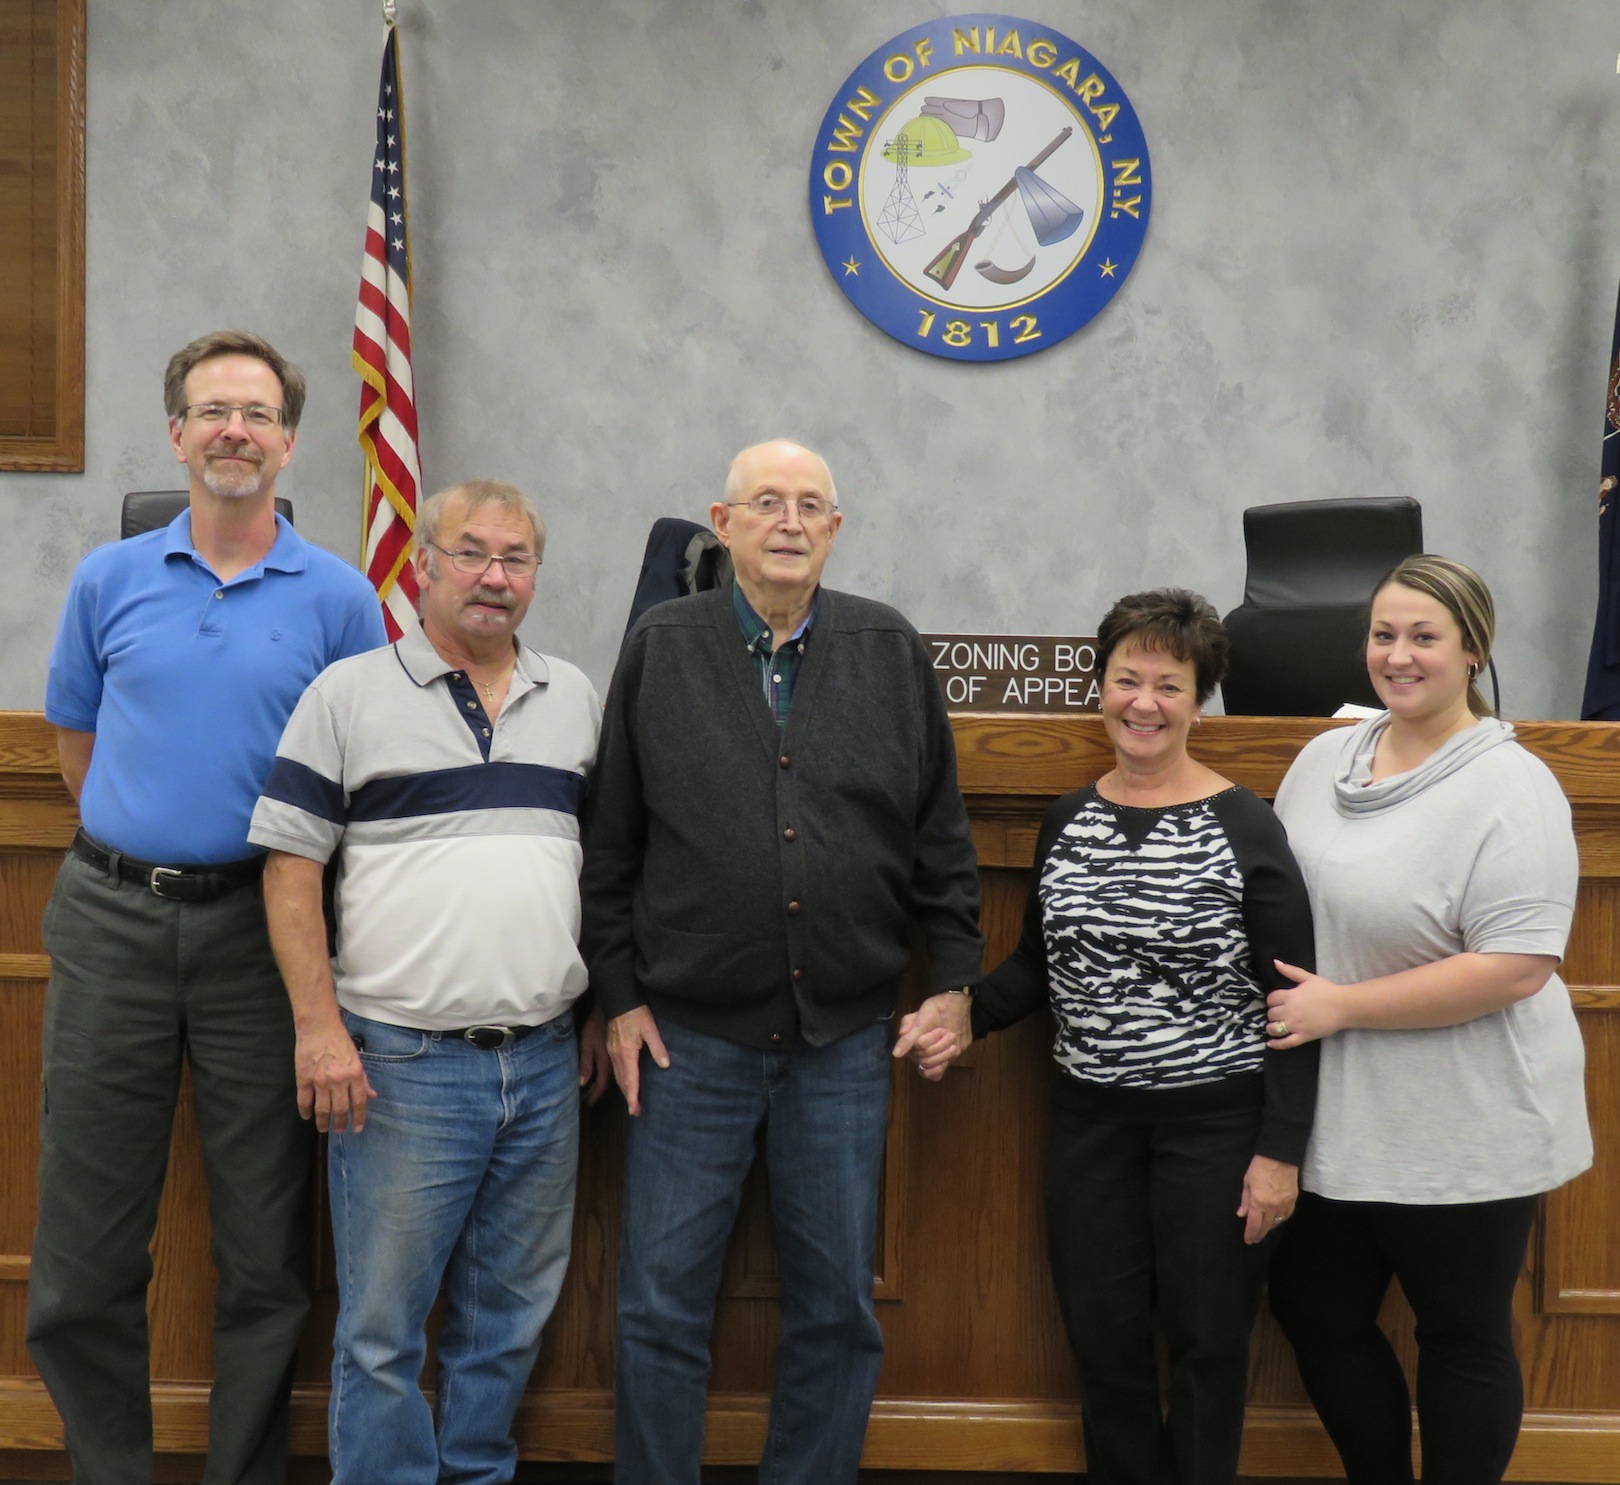 Pictured are members of the Zoning Board of Appeals with Jim Walsh. From left, Tom Cuddahee, Pat Barney, Walsh, JoAnna Wallace and Jody Wienke. (Photos by David Yarger)